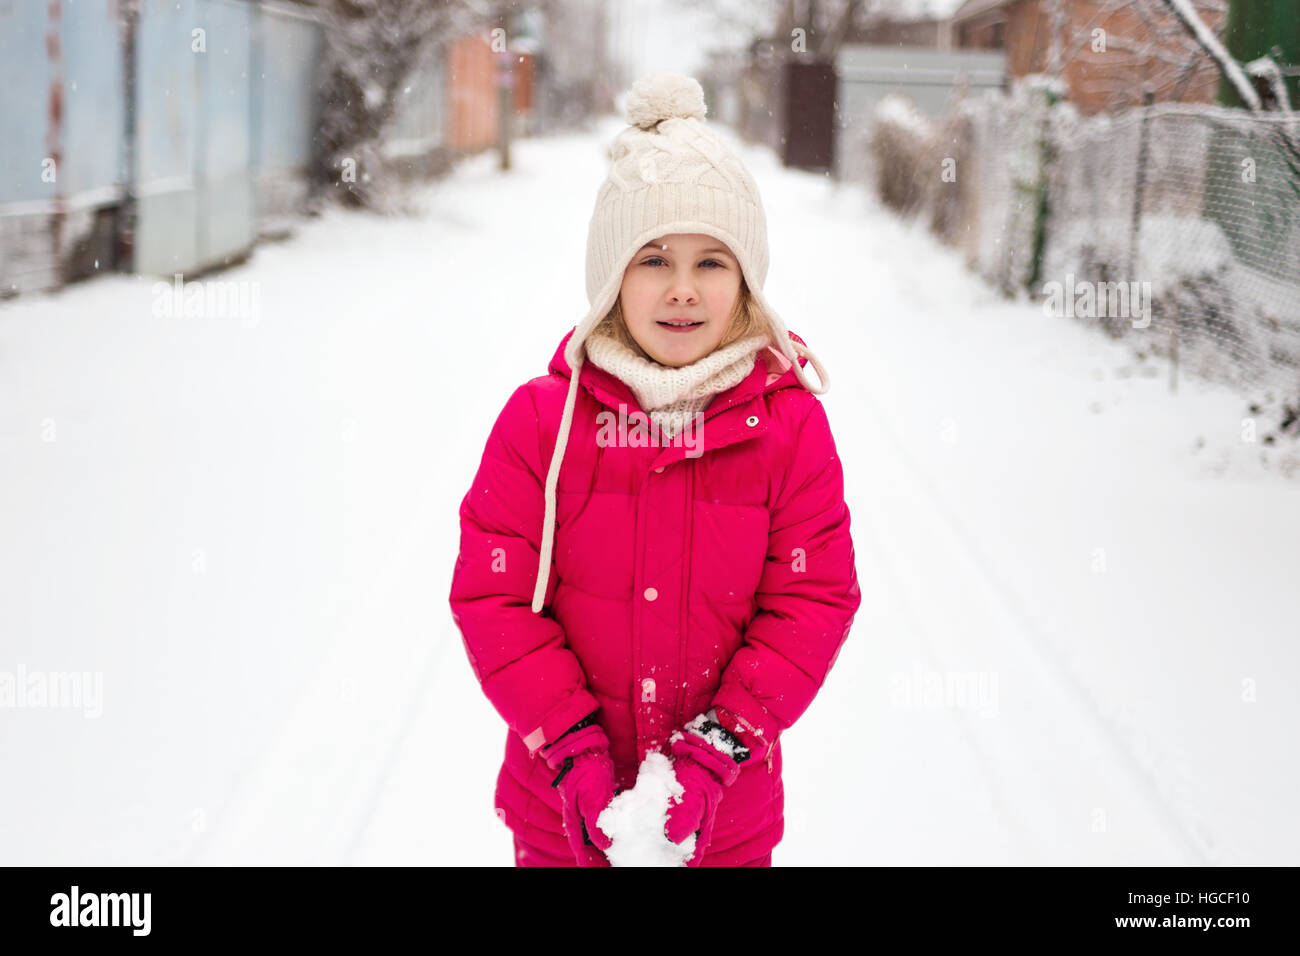 Adorable child girl playing outdoor with snow Stock Photo